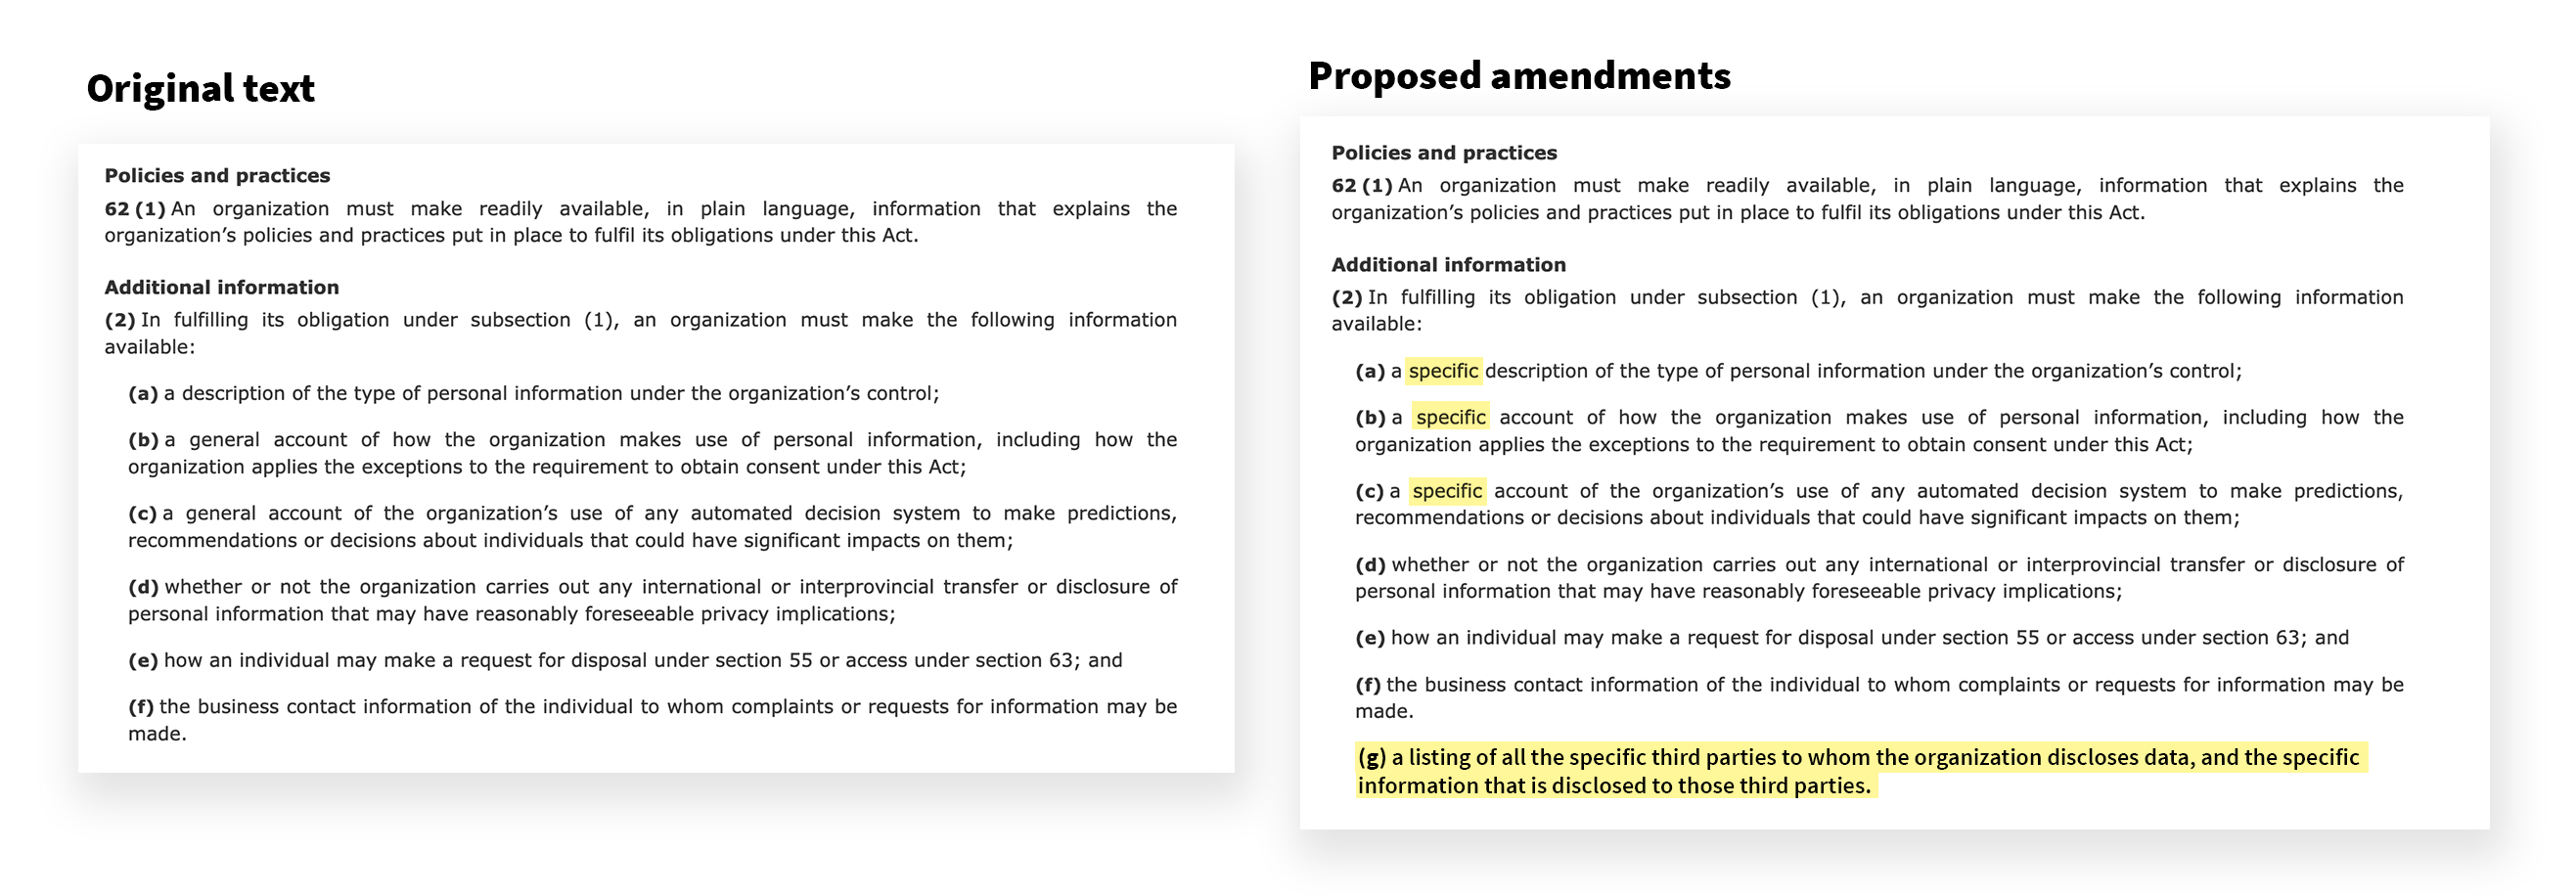 Screengrab of the original bill and proposed amendments to the Bill side by side.